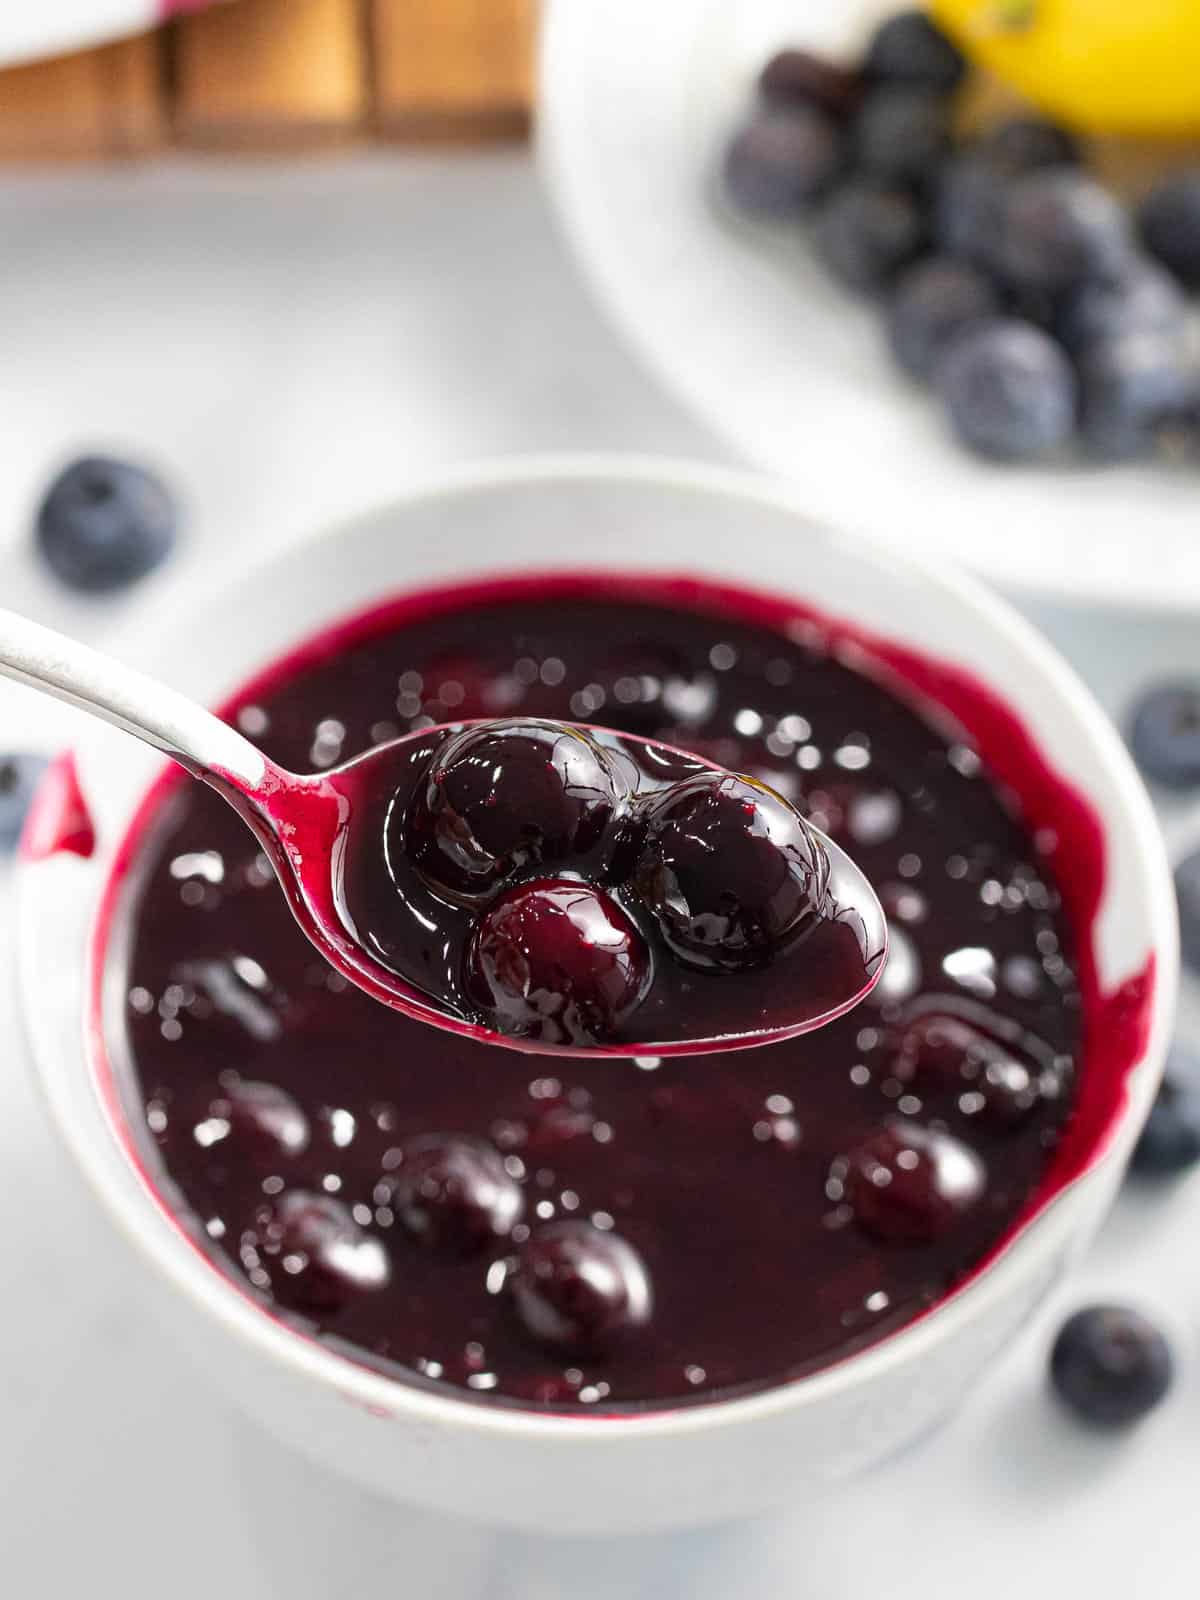 Blueberry compote served on a spoon with fresh blueberries.